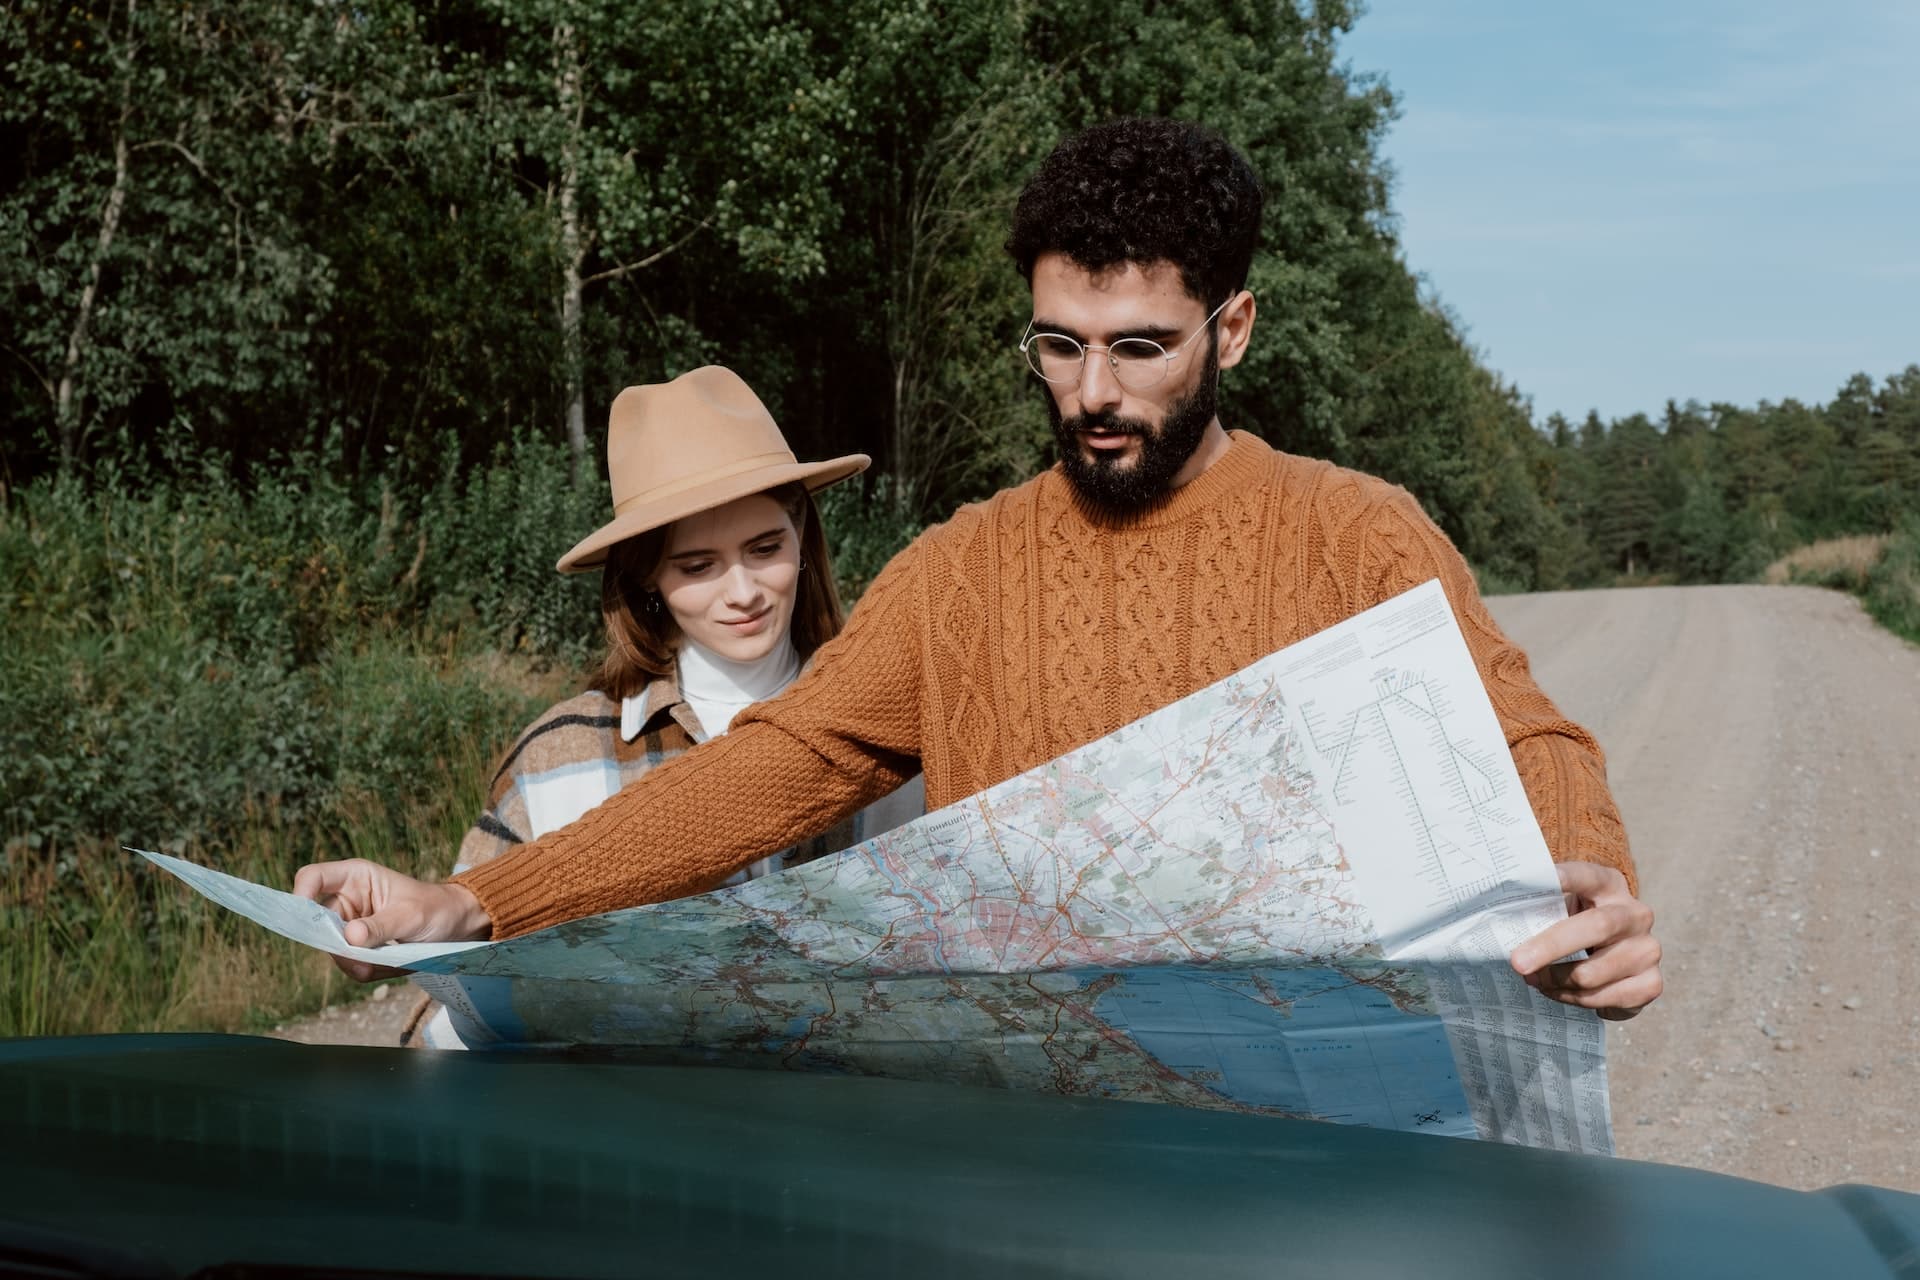 On their holiday road trip, this couple looks at a map for directions.